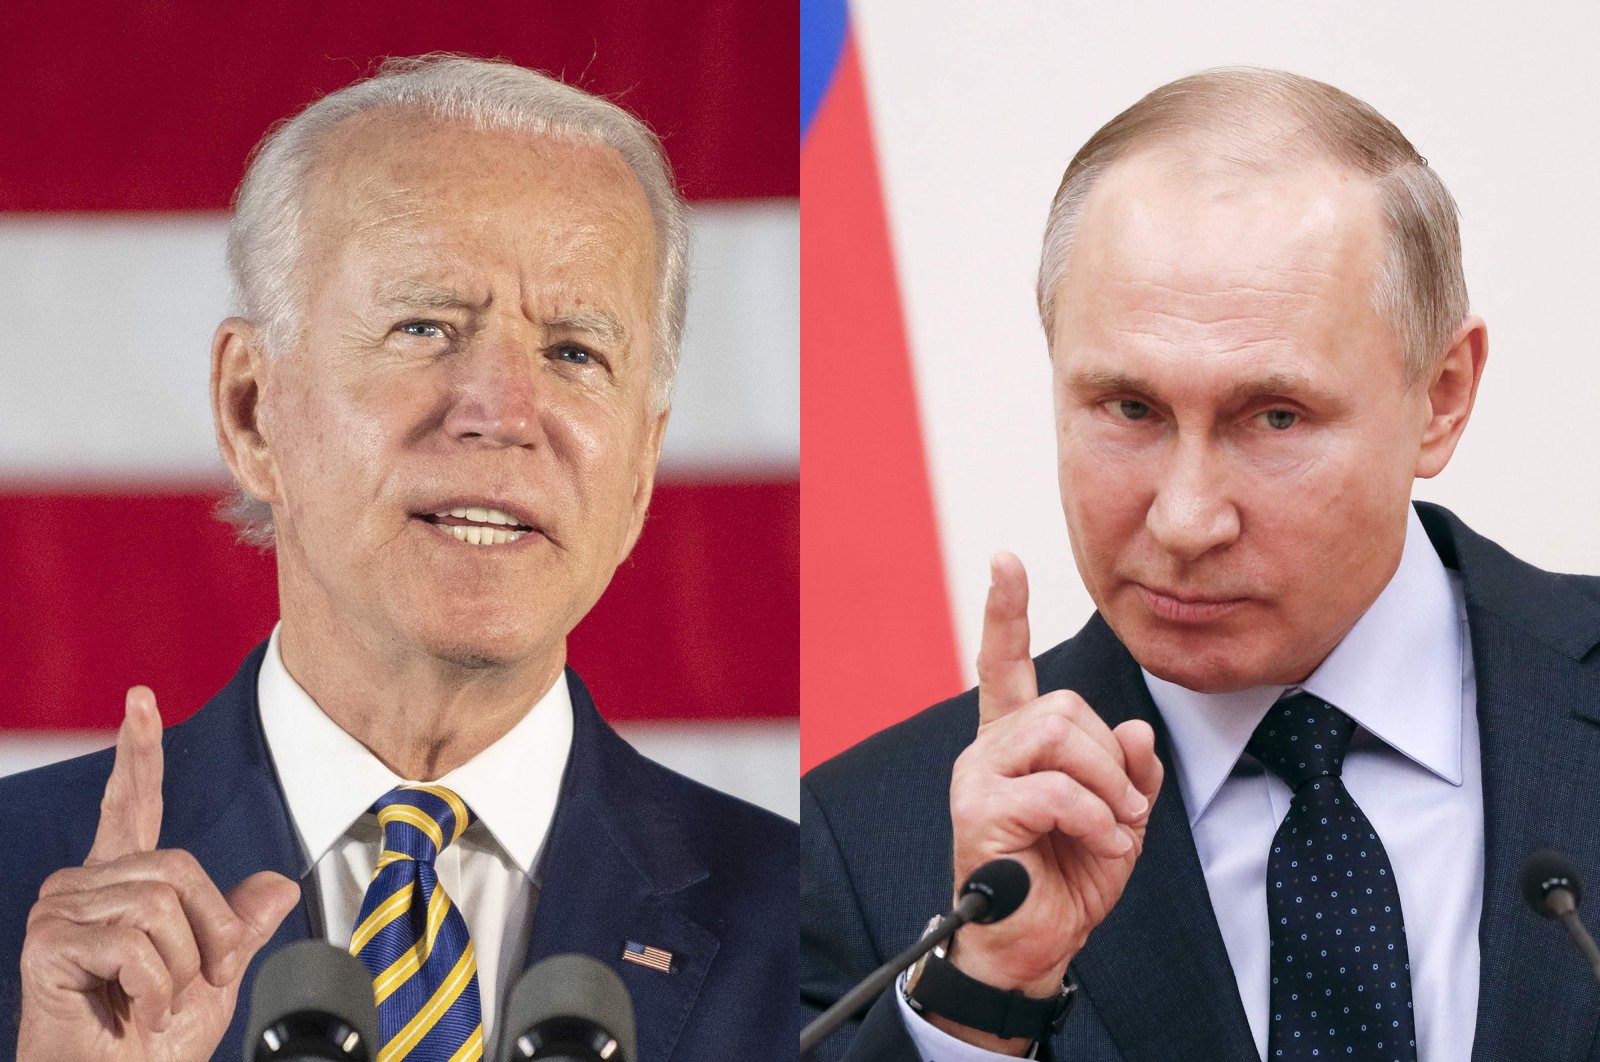 Then Democratic presidential candidate Joe Biden (L) speaks in Darby, Pennsylvania, U.S., June 17, 2020, and Russian President Vladimir Putin speaks during a meeting with Russian athletes outside Moscow, Russia, Jan. 31, 2018. (AFP Photo)